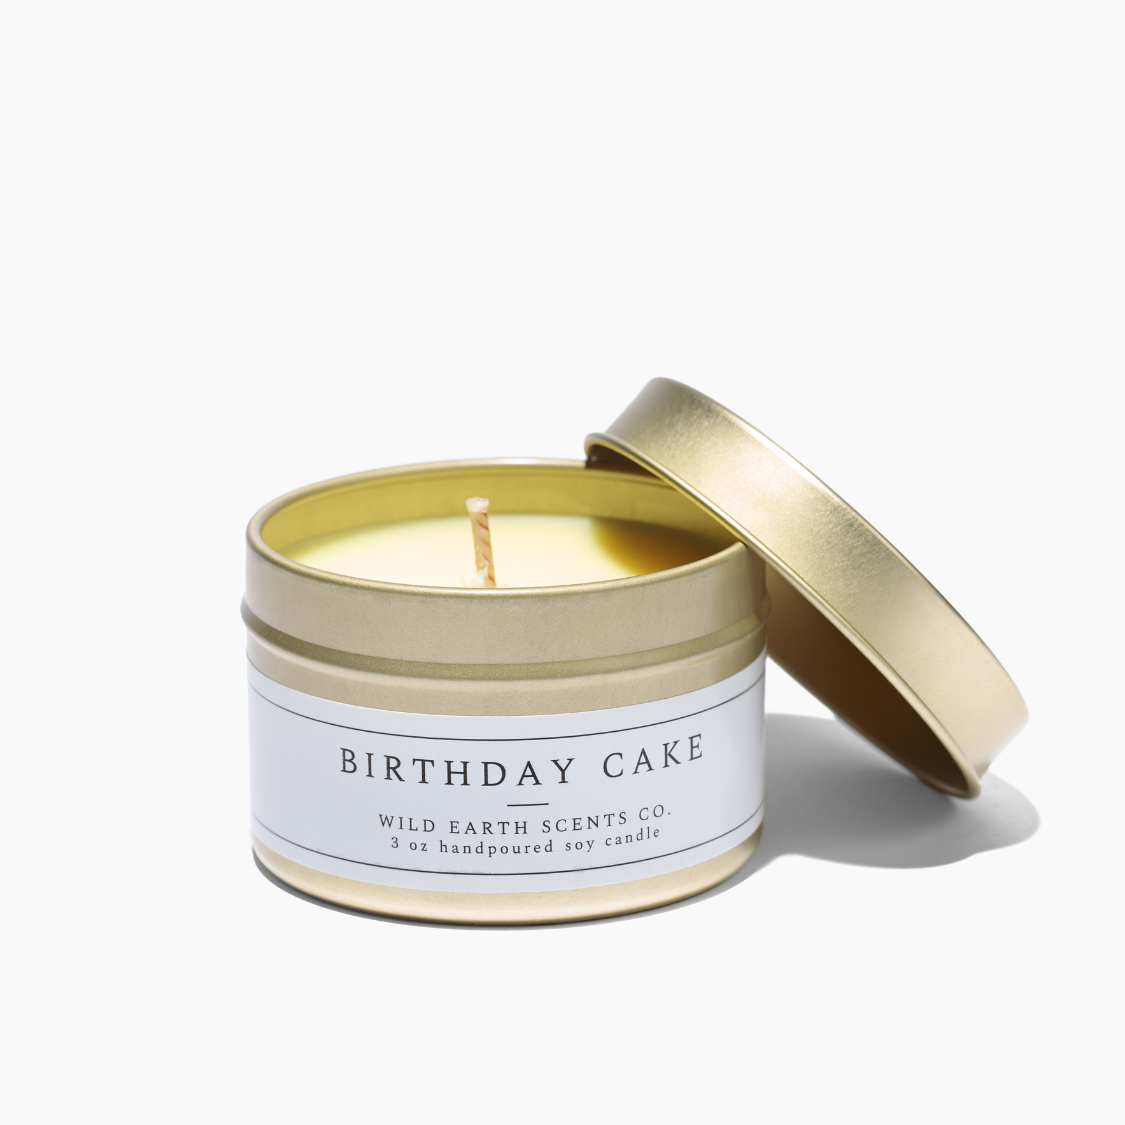 Birthday Cake Tin Candle By Wild Earth Co.